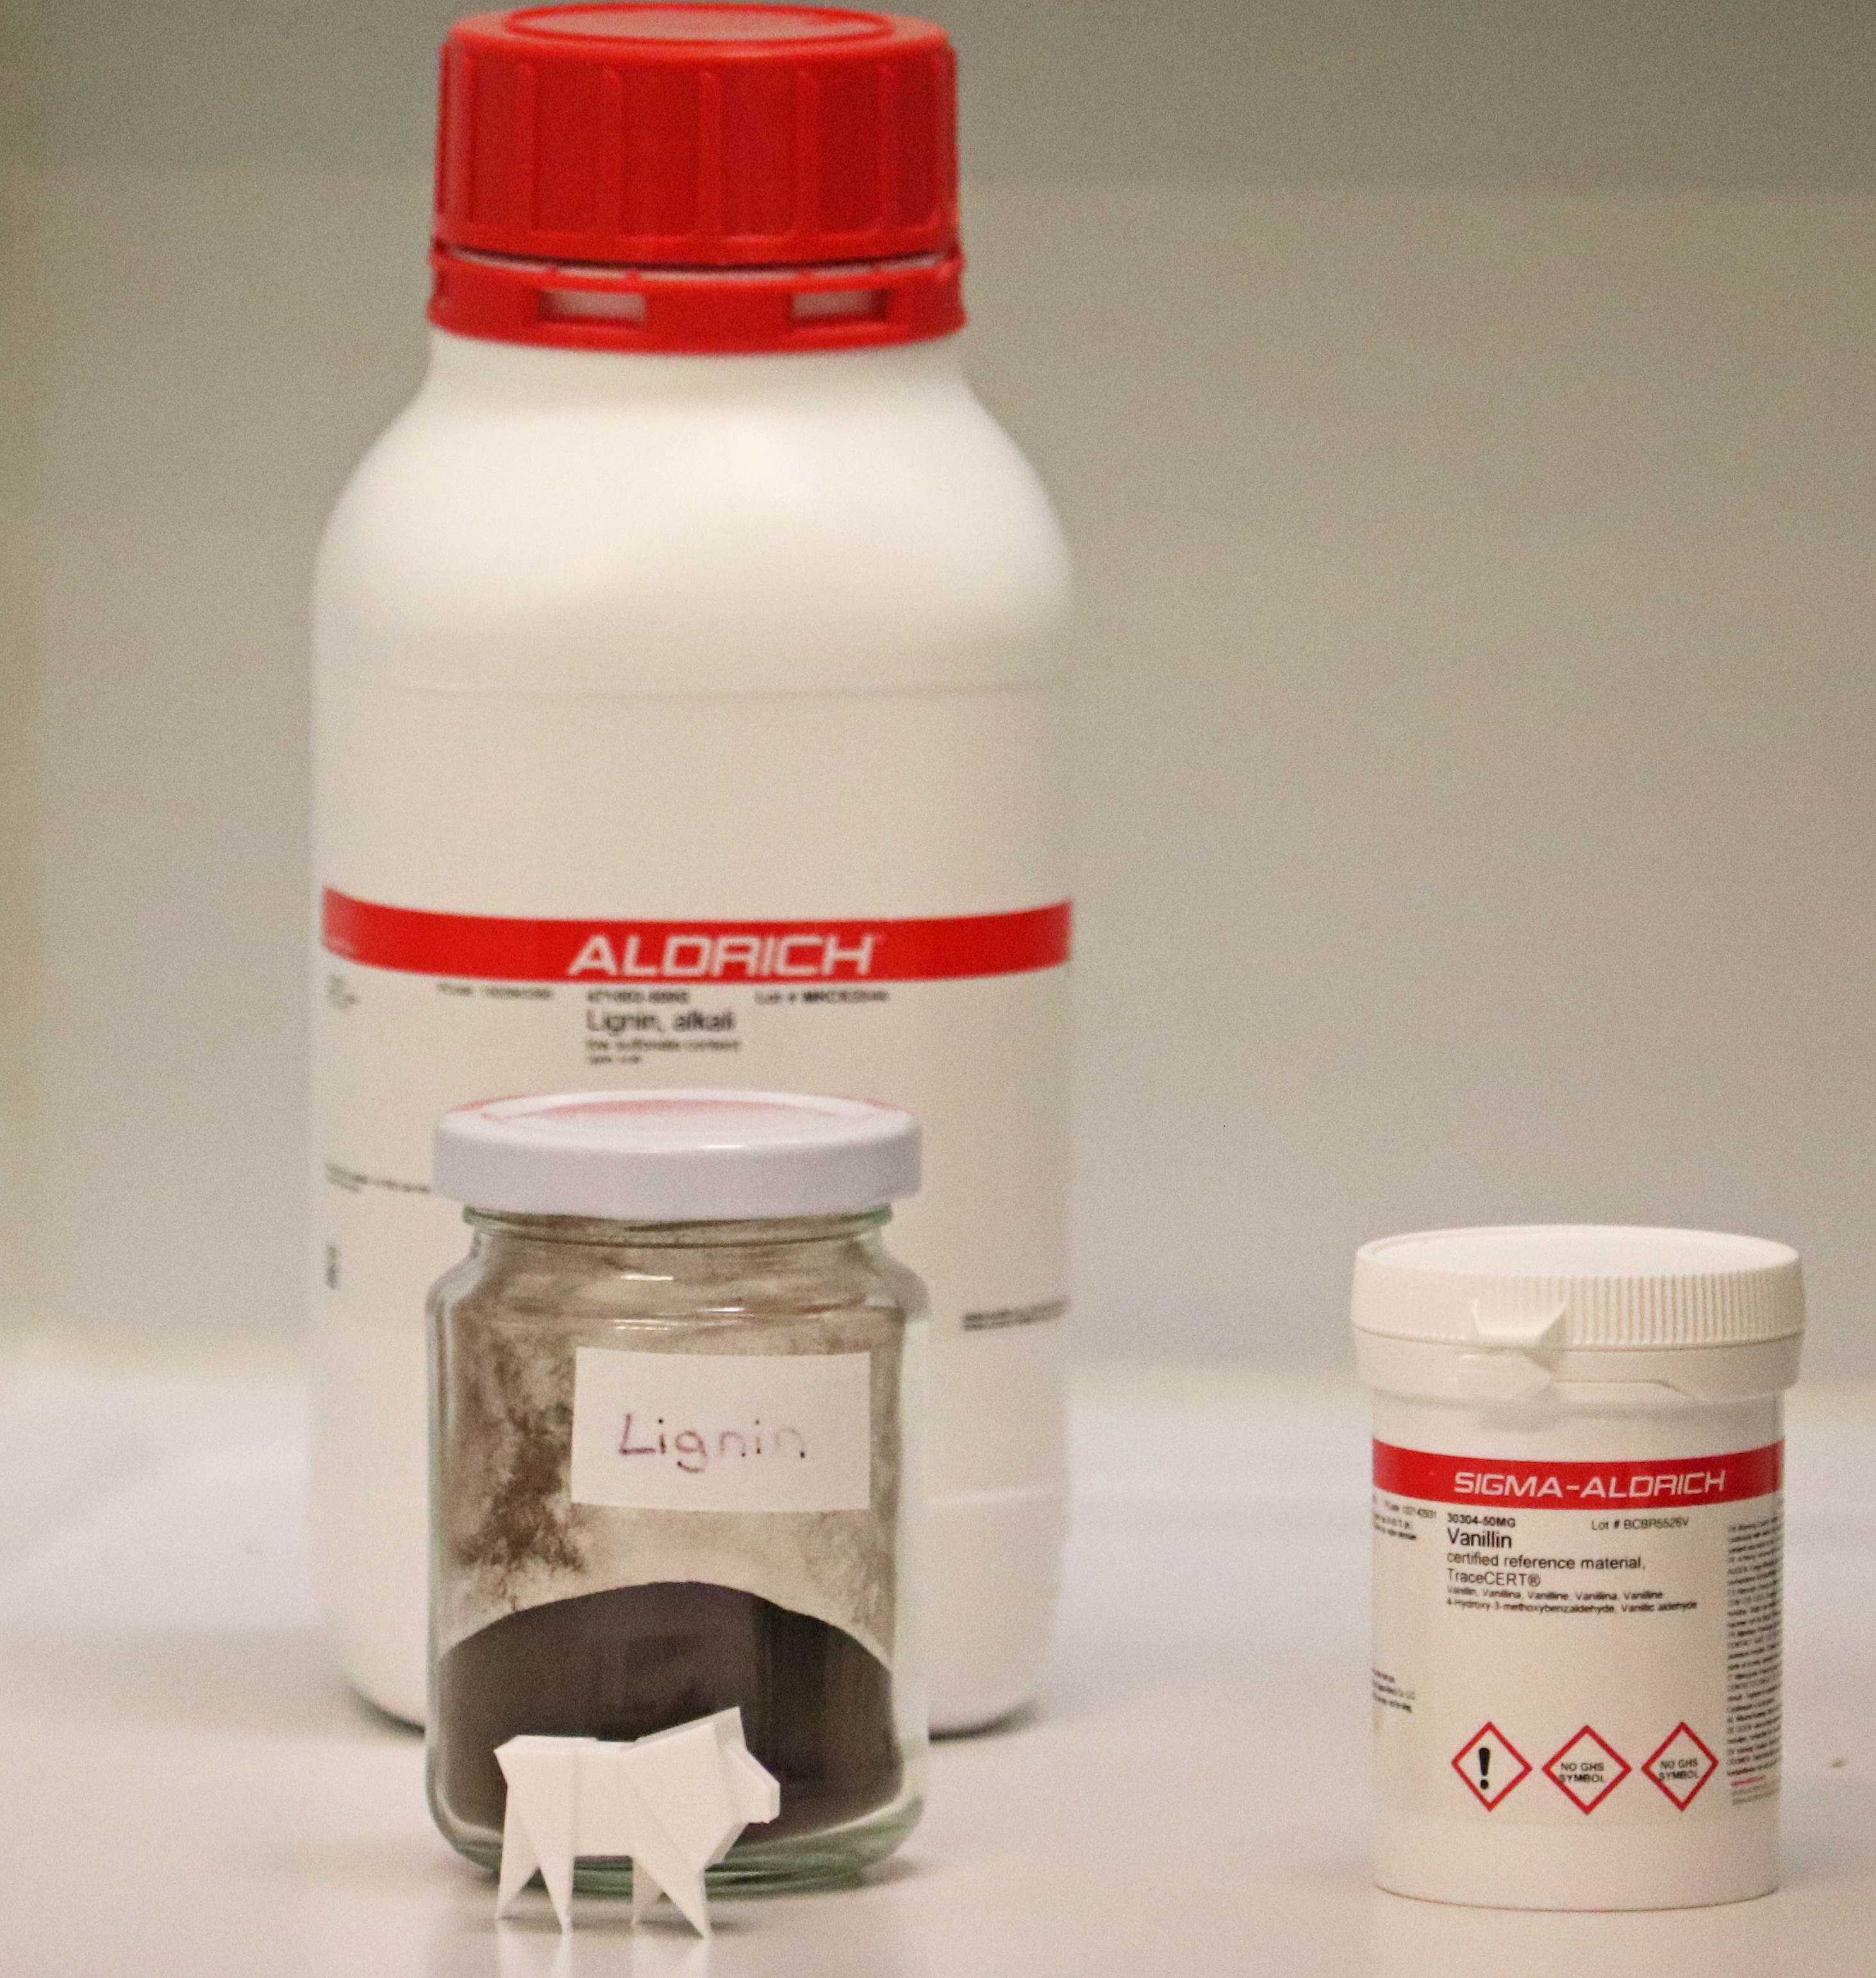 A large white plastic bottle with a red lid and a white-red label, a smaller plastic container with a white lid and a red-white label with black writing, and a glass container with a white lid and a label with the inscription Lignin can be seen. The glass container contains a brown powder.